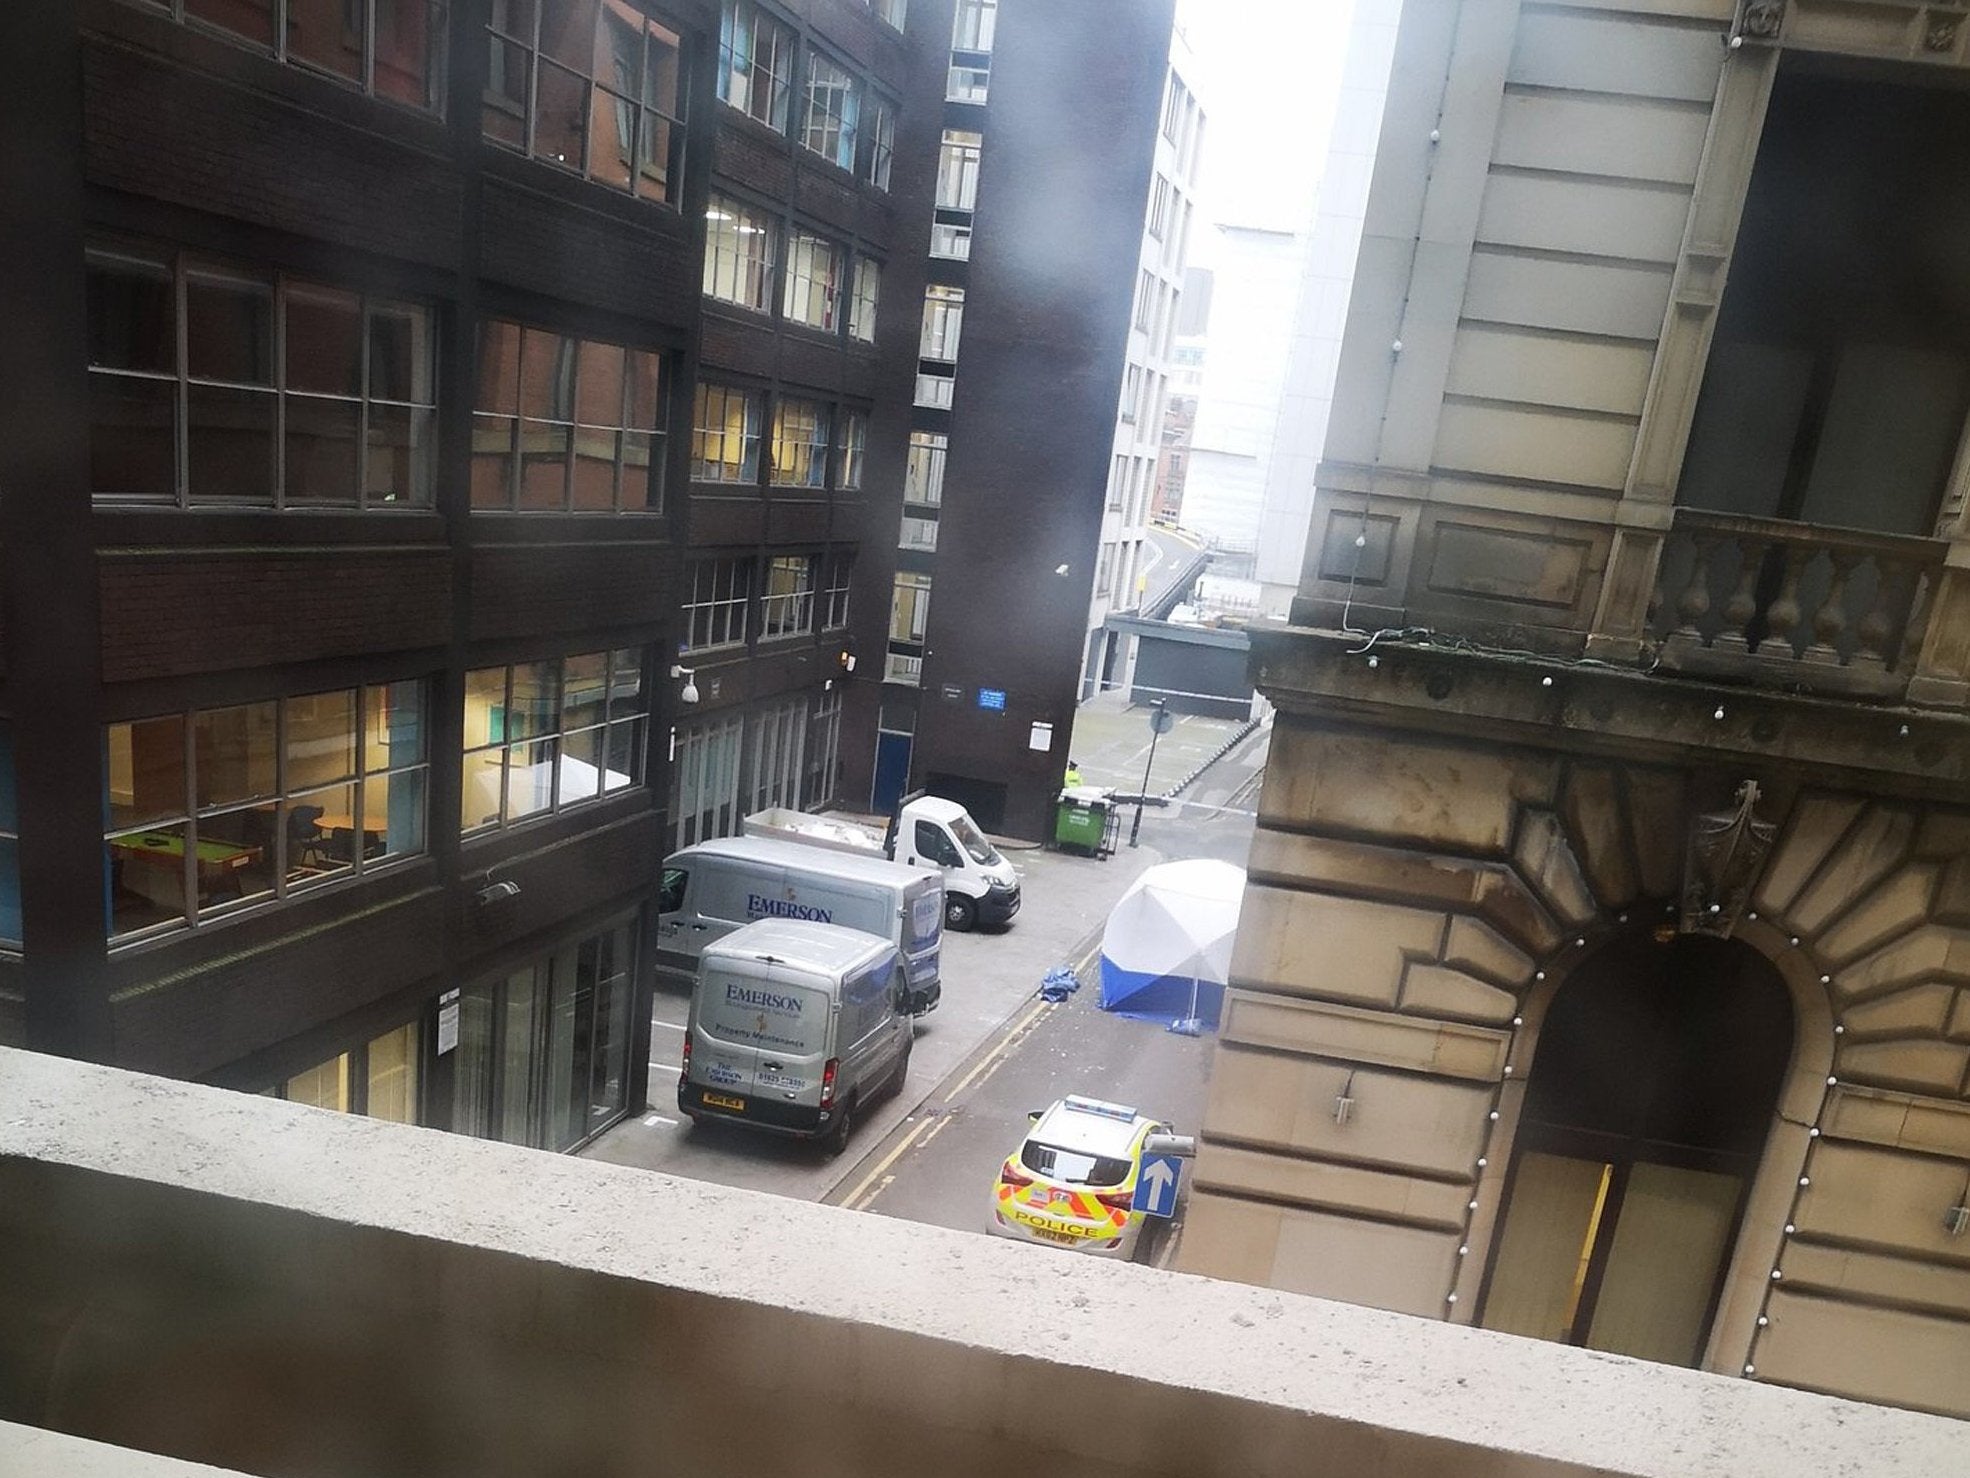 Police are investigating the death of a man in Portland Street, Manchester city centre